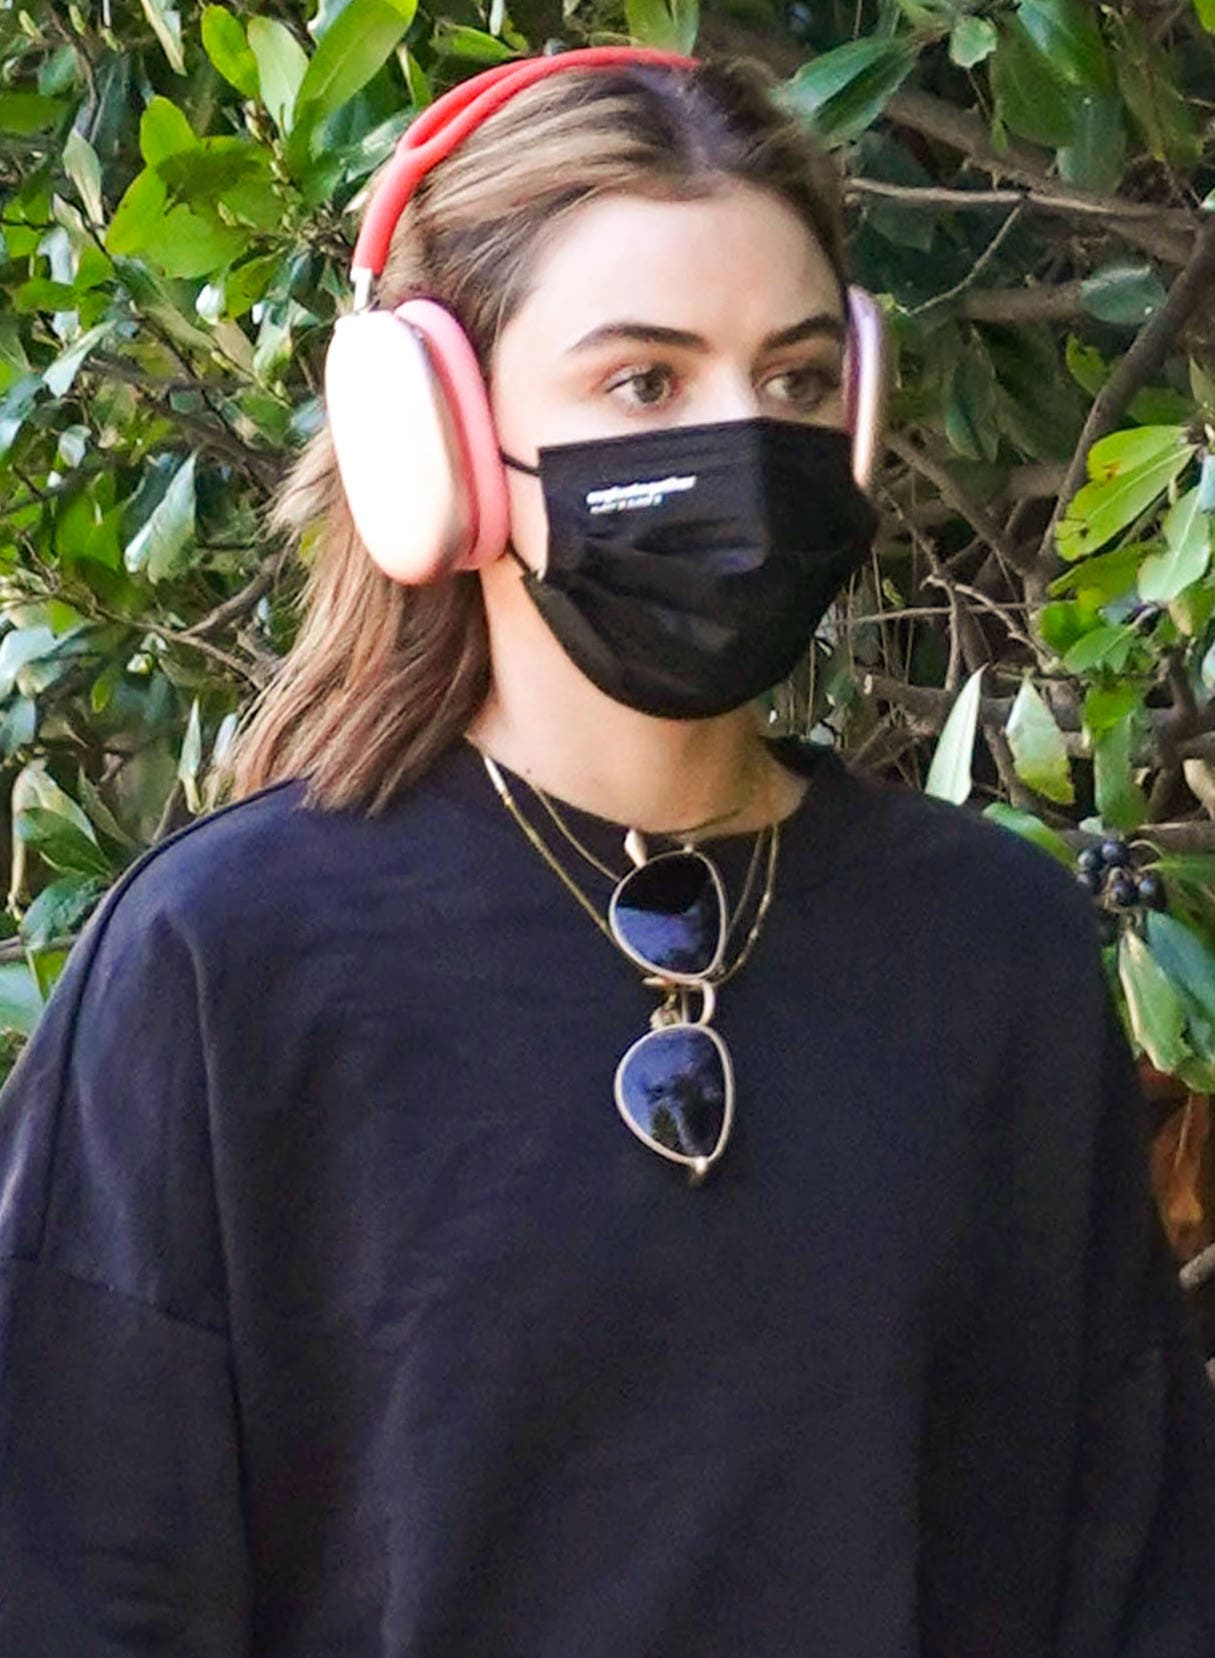 Bare-faced Lucy Hale wears a pair of noise-canceling headphones